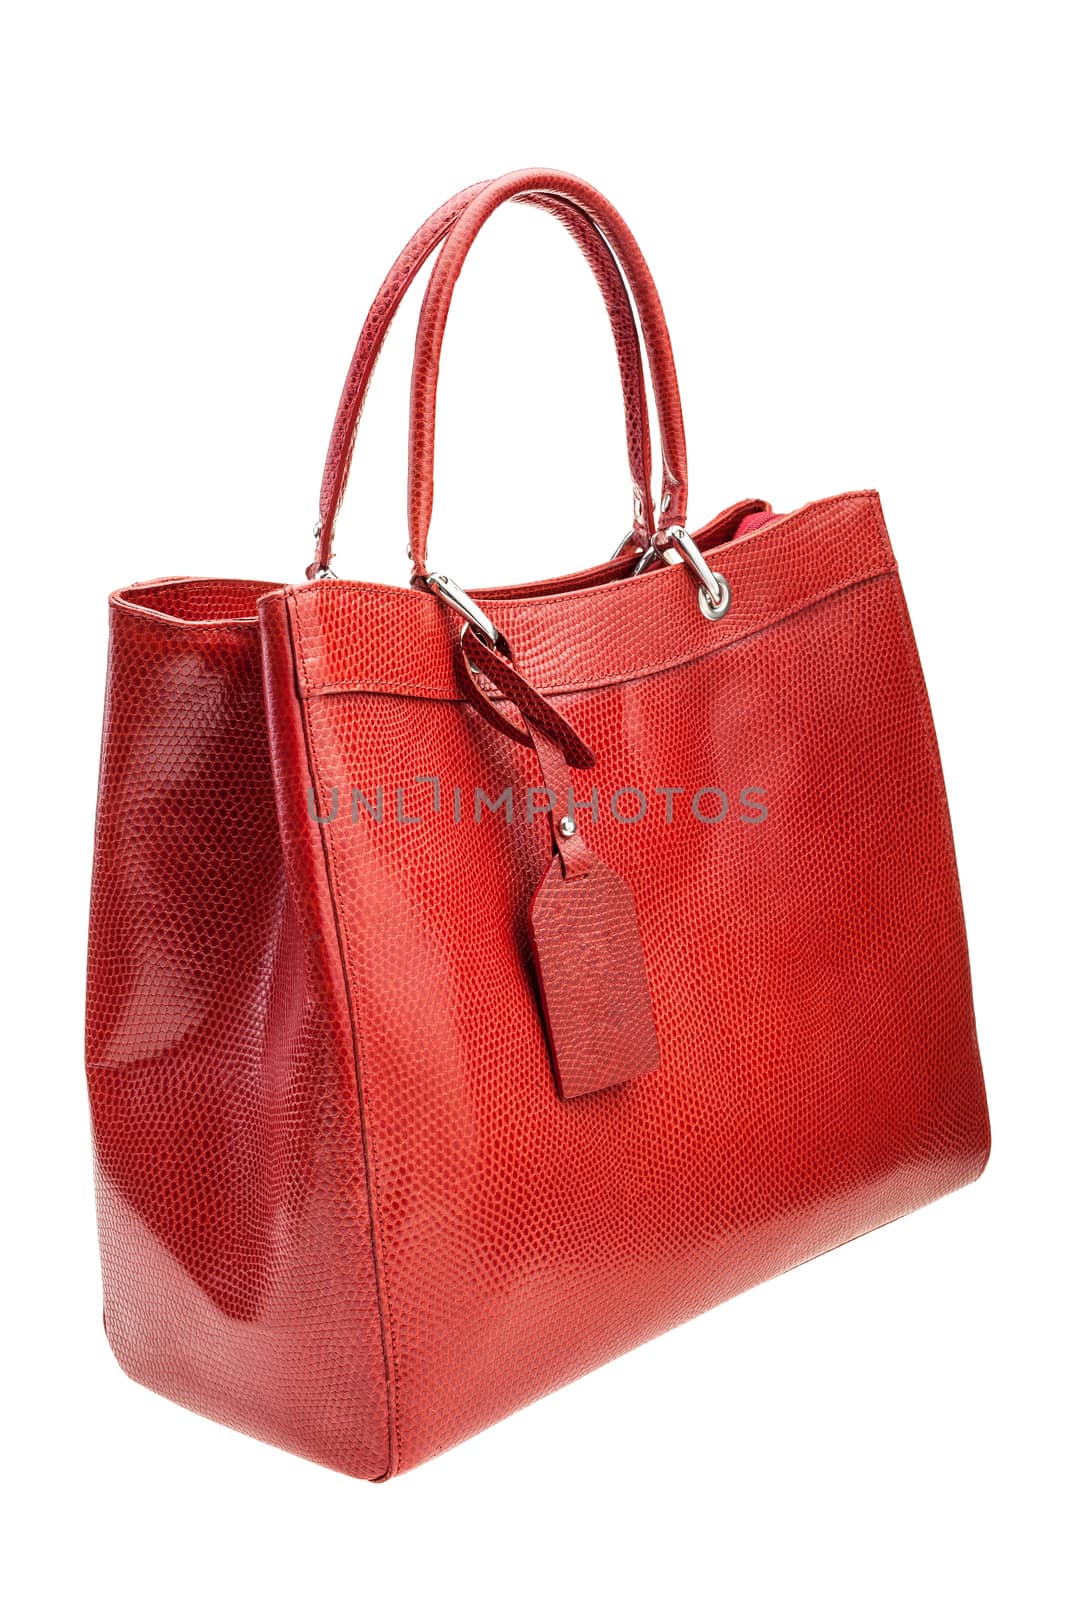 New red womens bag isolated on white background.